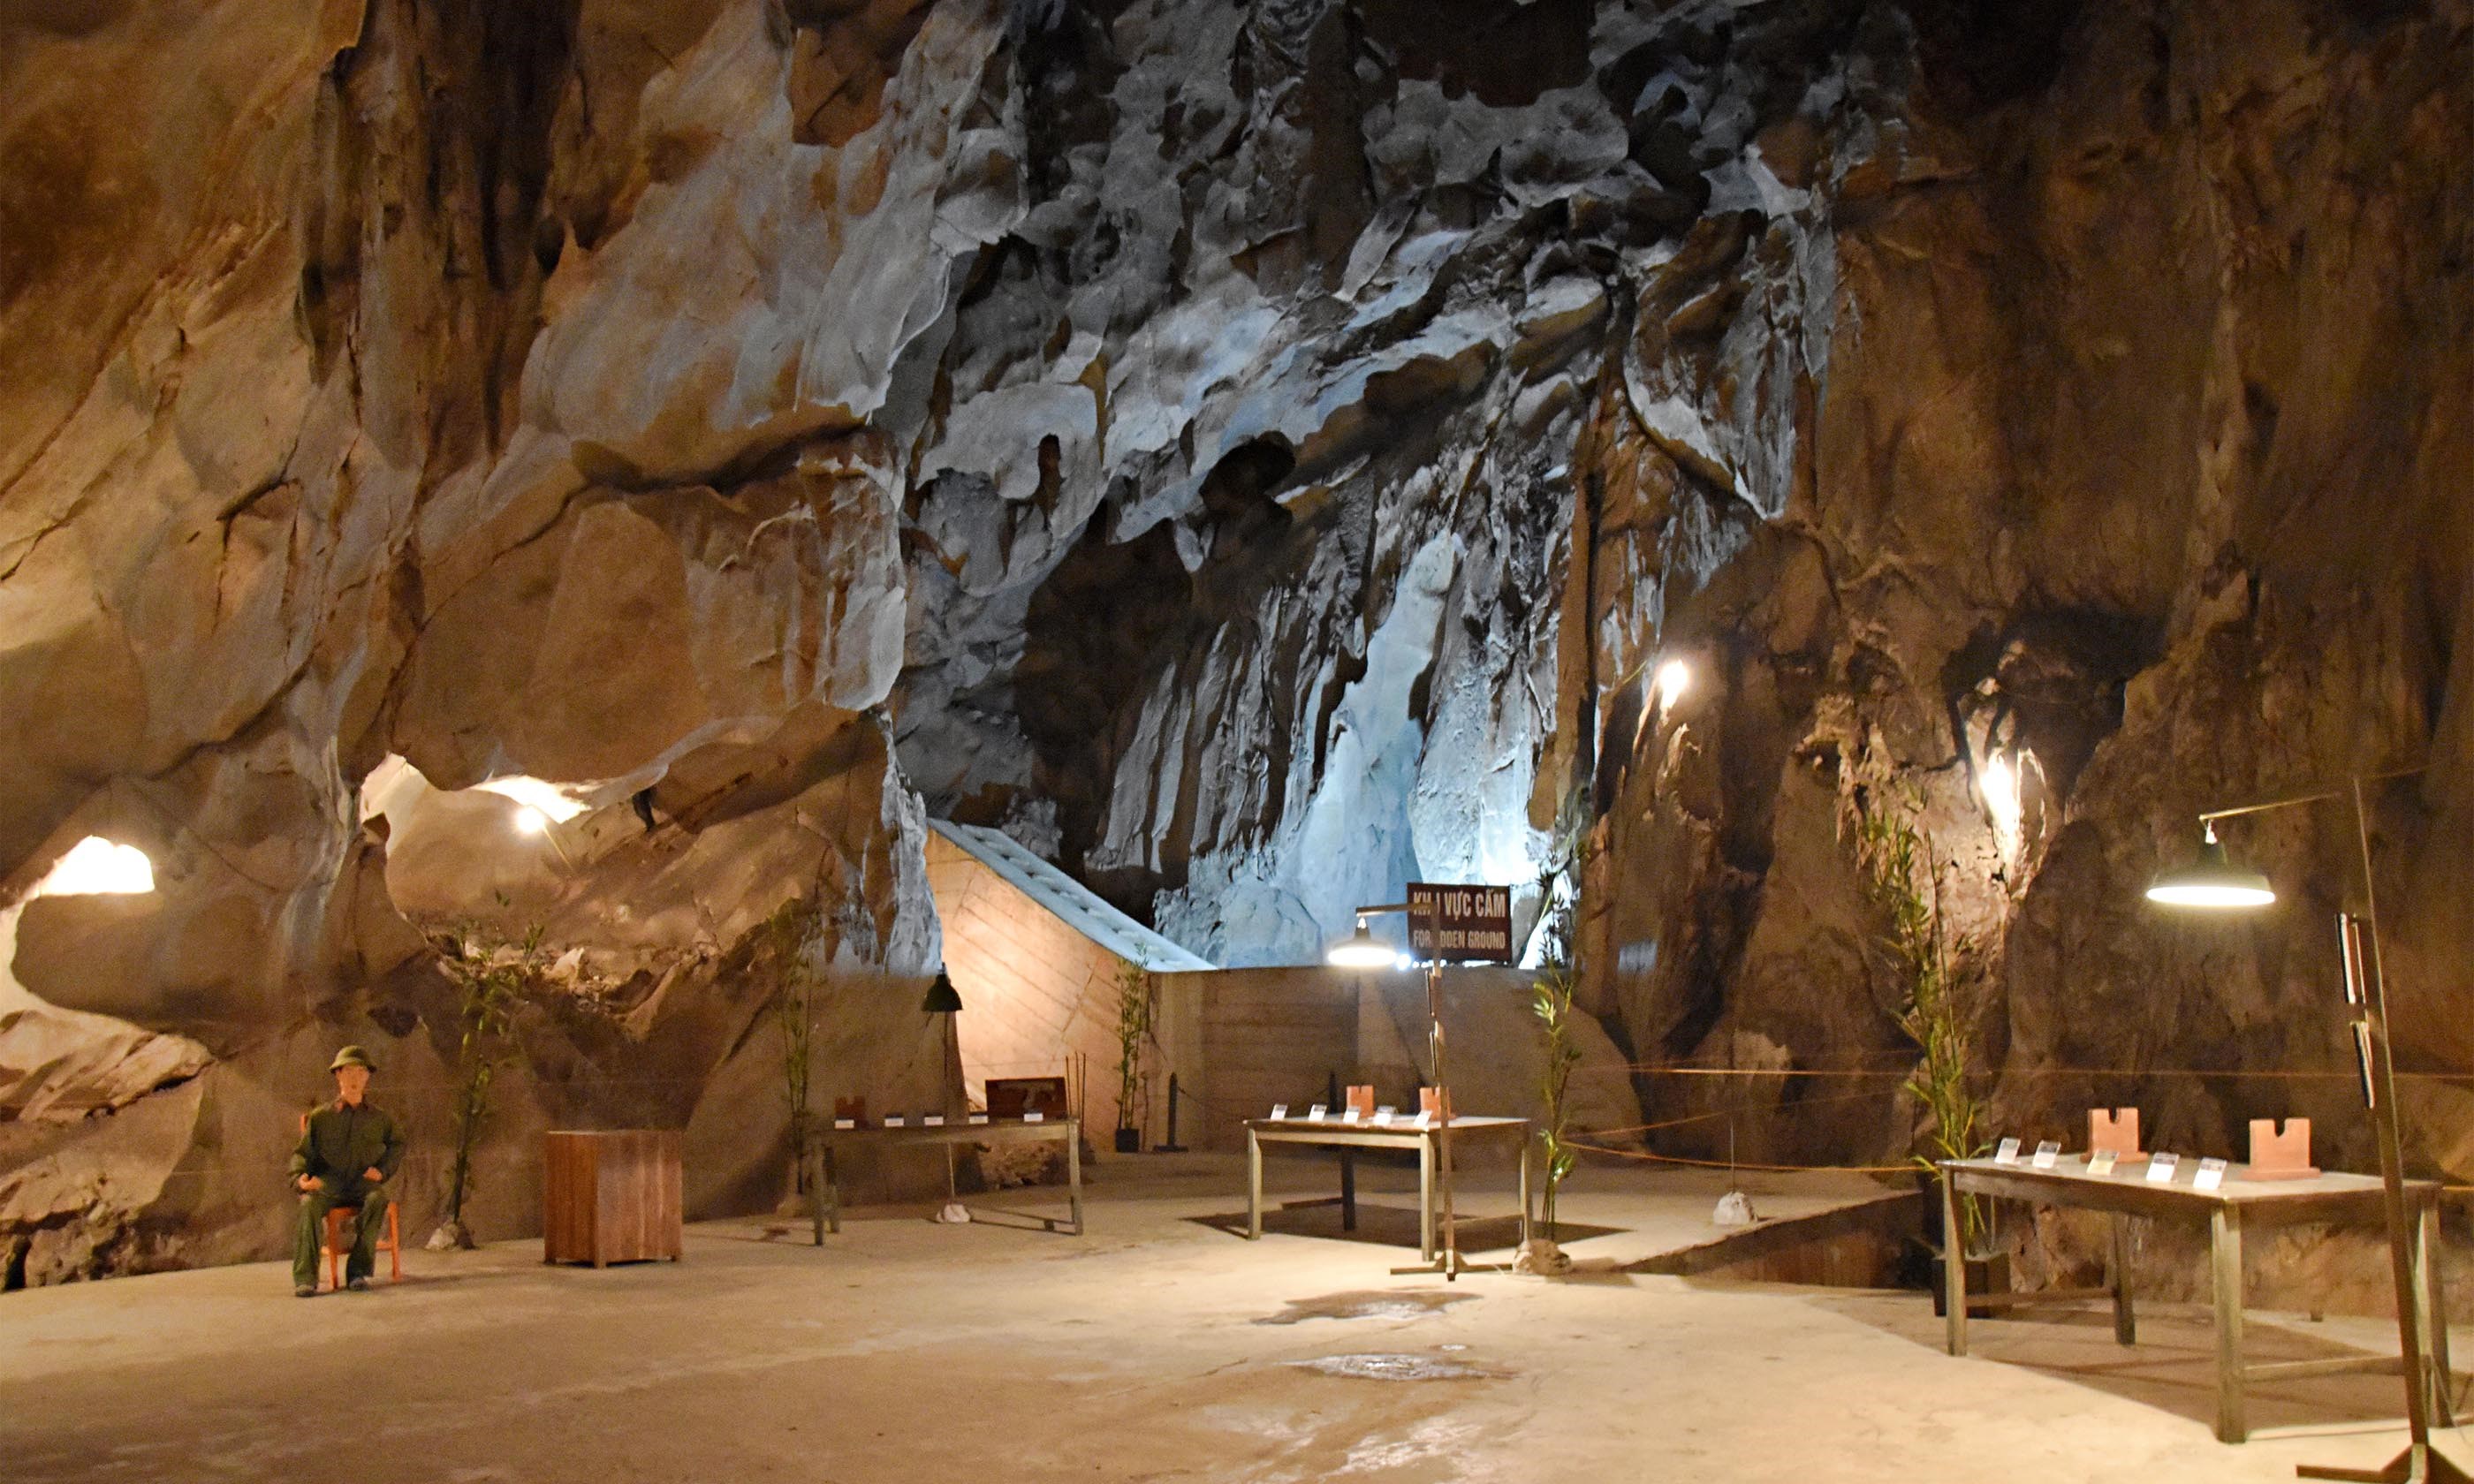 One of the many incredible rooms inside Hospital Cave, which was used during the Vietnam War (Shutterstock)